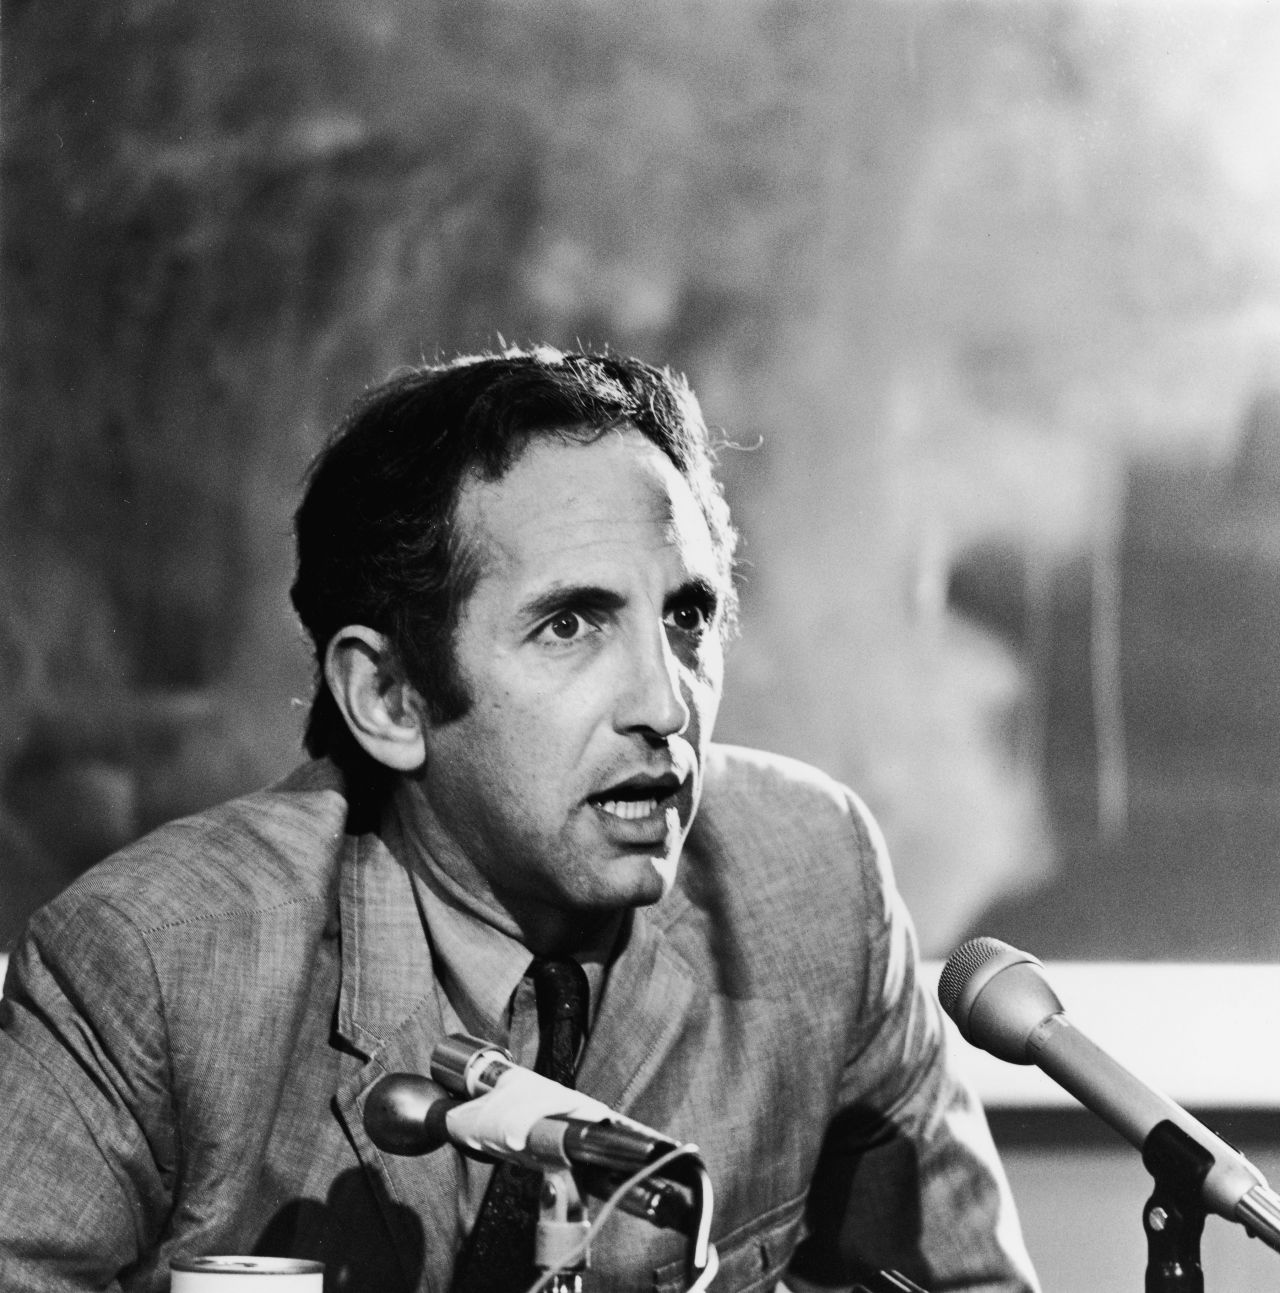 Military analyst <a href="http://www.cnn.com/2011/US/03/19/wikileaks.ellsberg.manning/index.html">Daniel Ellsberg</a> leaked the 7,000-page Pentagon Papers in 1971. The top-secret documents revealed that senior American leaders, including three presidents, knew the Vietnam War was an unwinnable, tragic quagmire. Further, they showed that the government had lied to Congress and the public about the progress of the war. Ellsberg surrendered to authorities and was charged as a spy. During his trial, the court learned that President Richard Nixon's administration had embarked on a campaign to discredit Ellsberg, illegally wiretapping him and breaking into his psychiatrist's office. All charges against him were dropped. Since then he has lived a relatively quiet life as a respected author and lecturer.